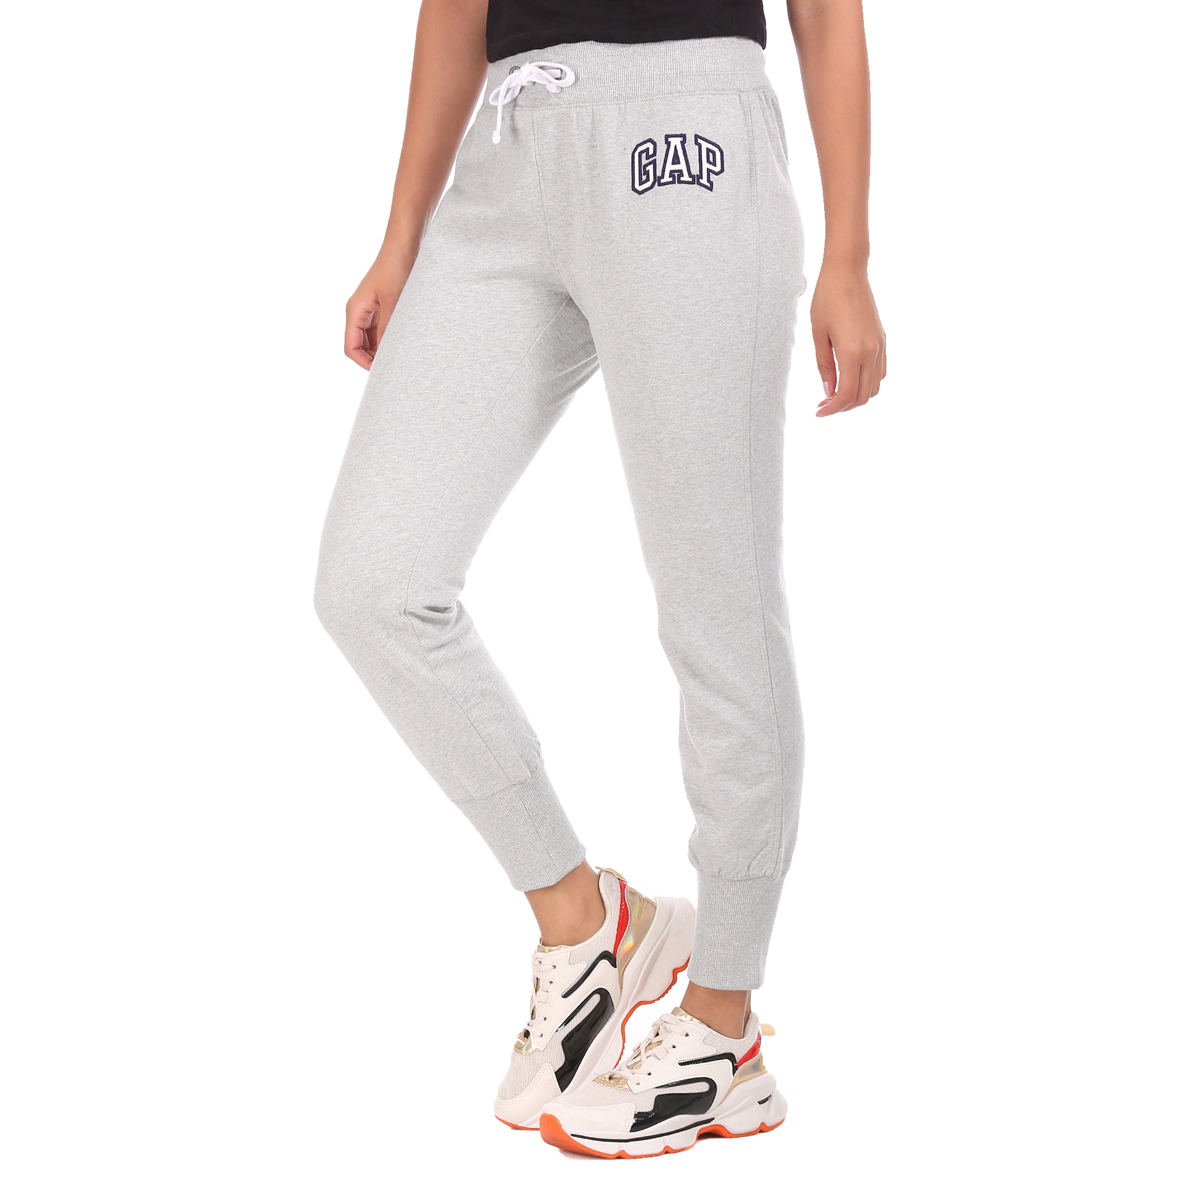 Gap Mid Rise Regular Fit Soft Cozy Fleece Knitted Solid Color Jogger Styled with Applique Worked Logo - Lt. Grey